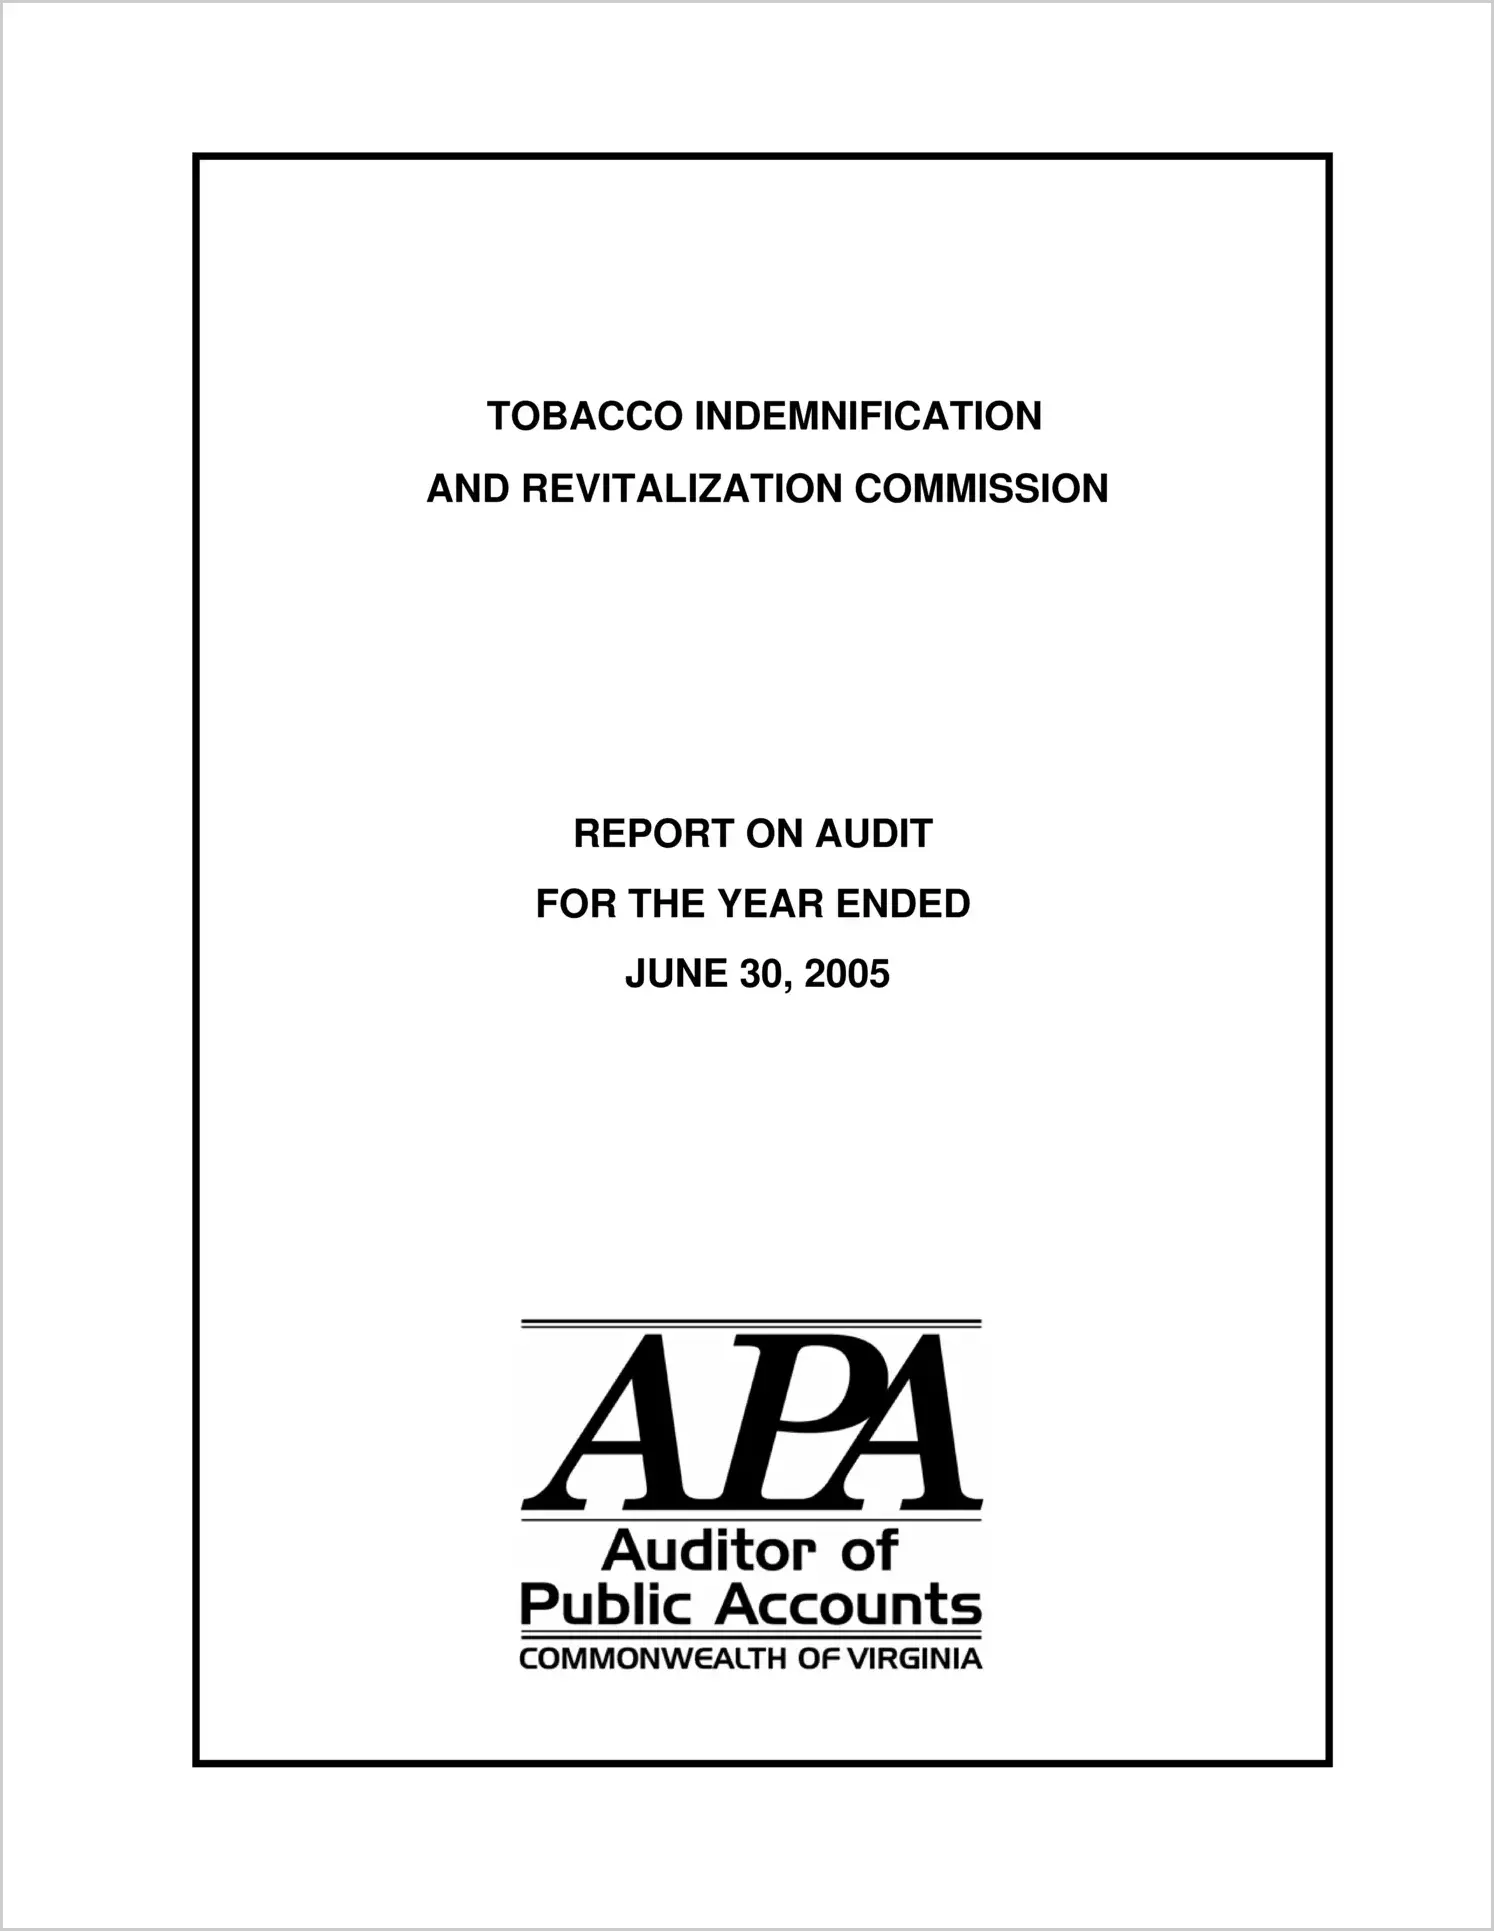 Tobacco Indemnification and Community Revitalization Commission for the year ended June 30, 2005